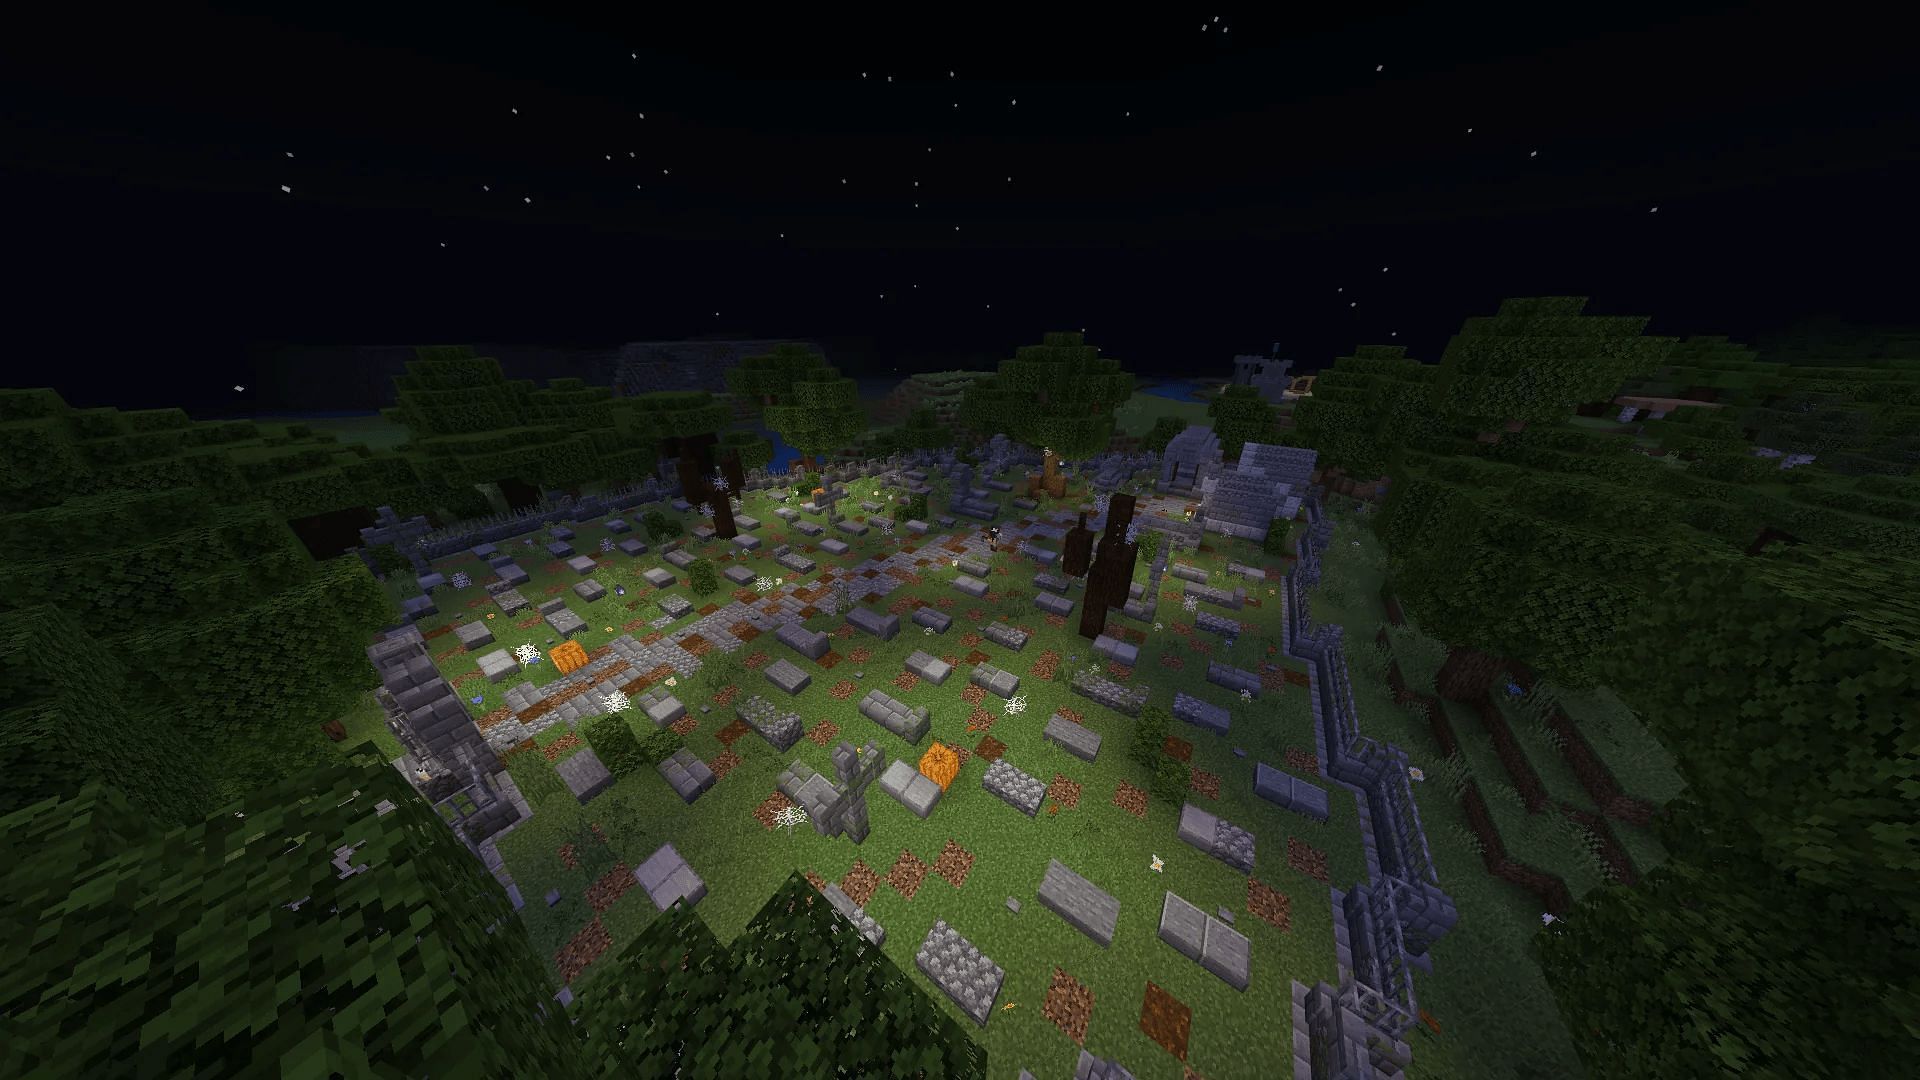 Halloween builds are perfect in Minecraft this time of year (Image via Conquerant1262/Reddit)